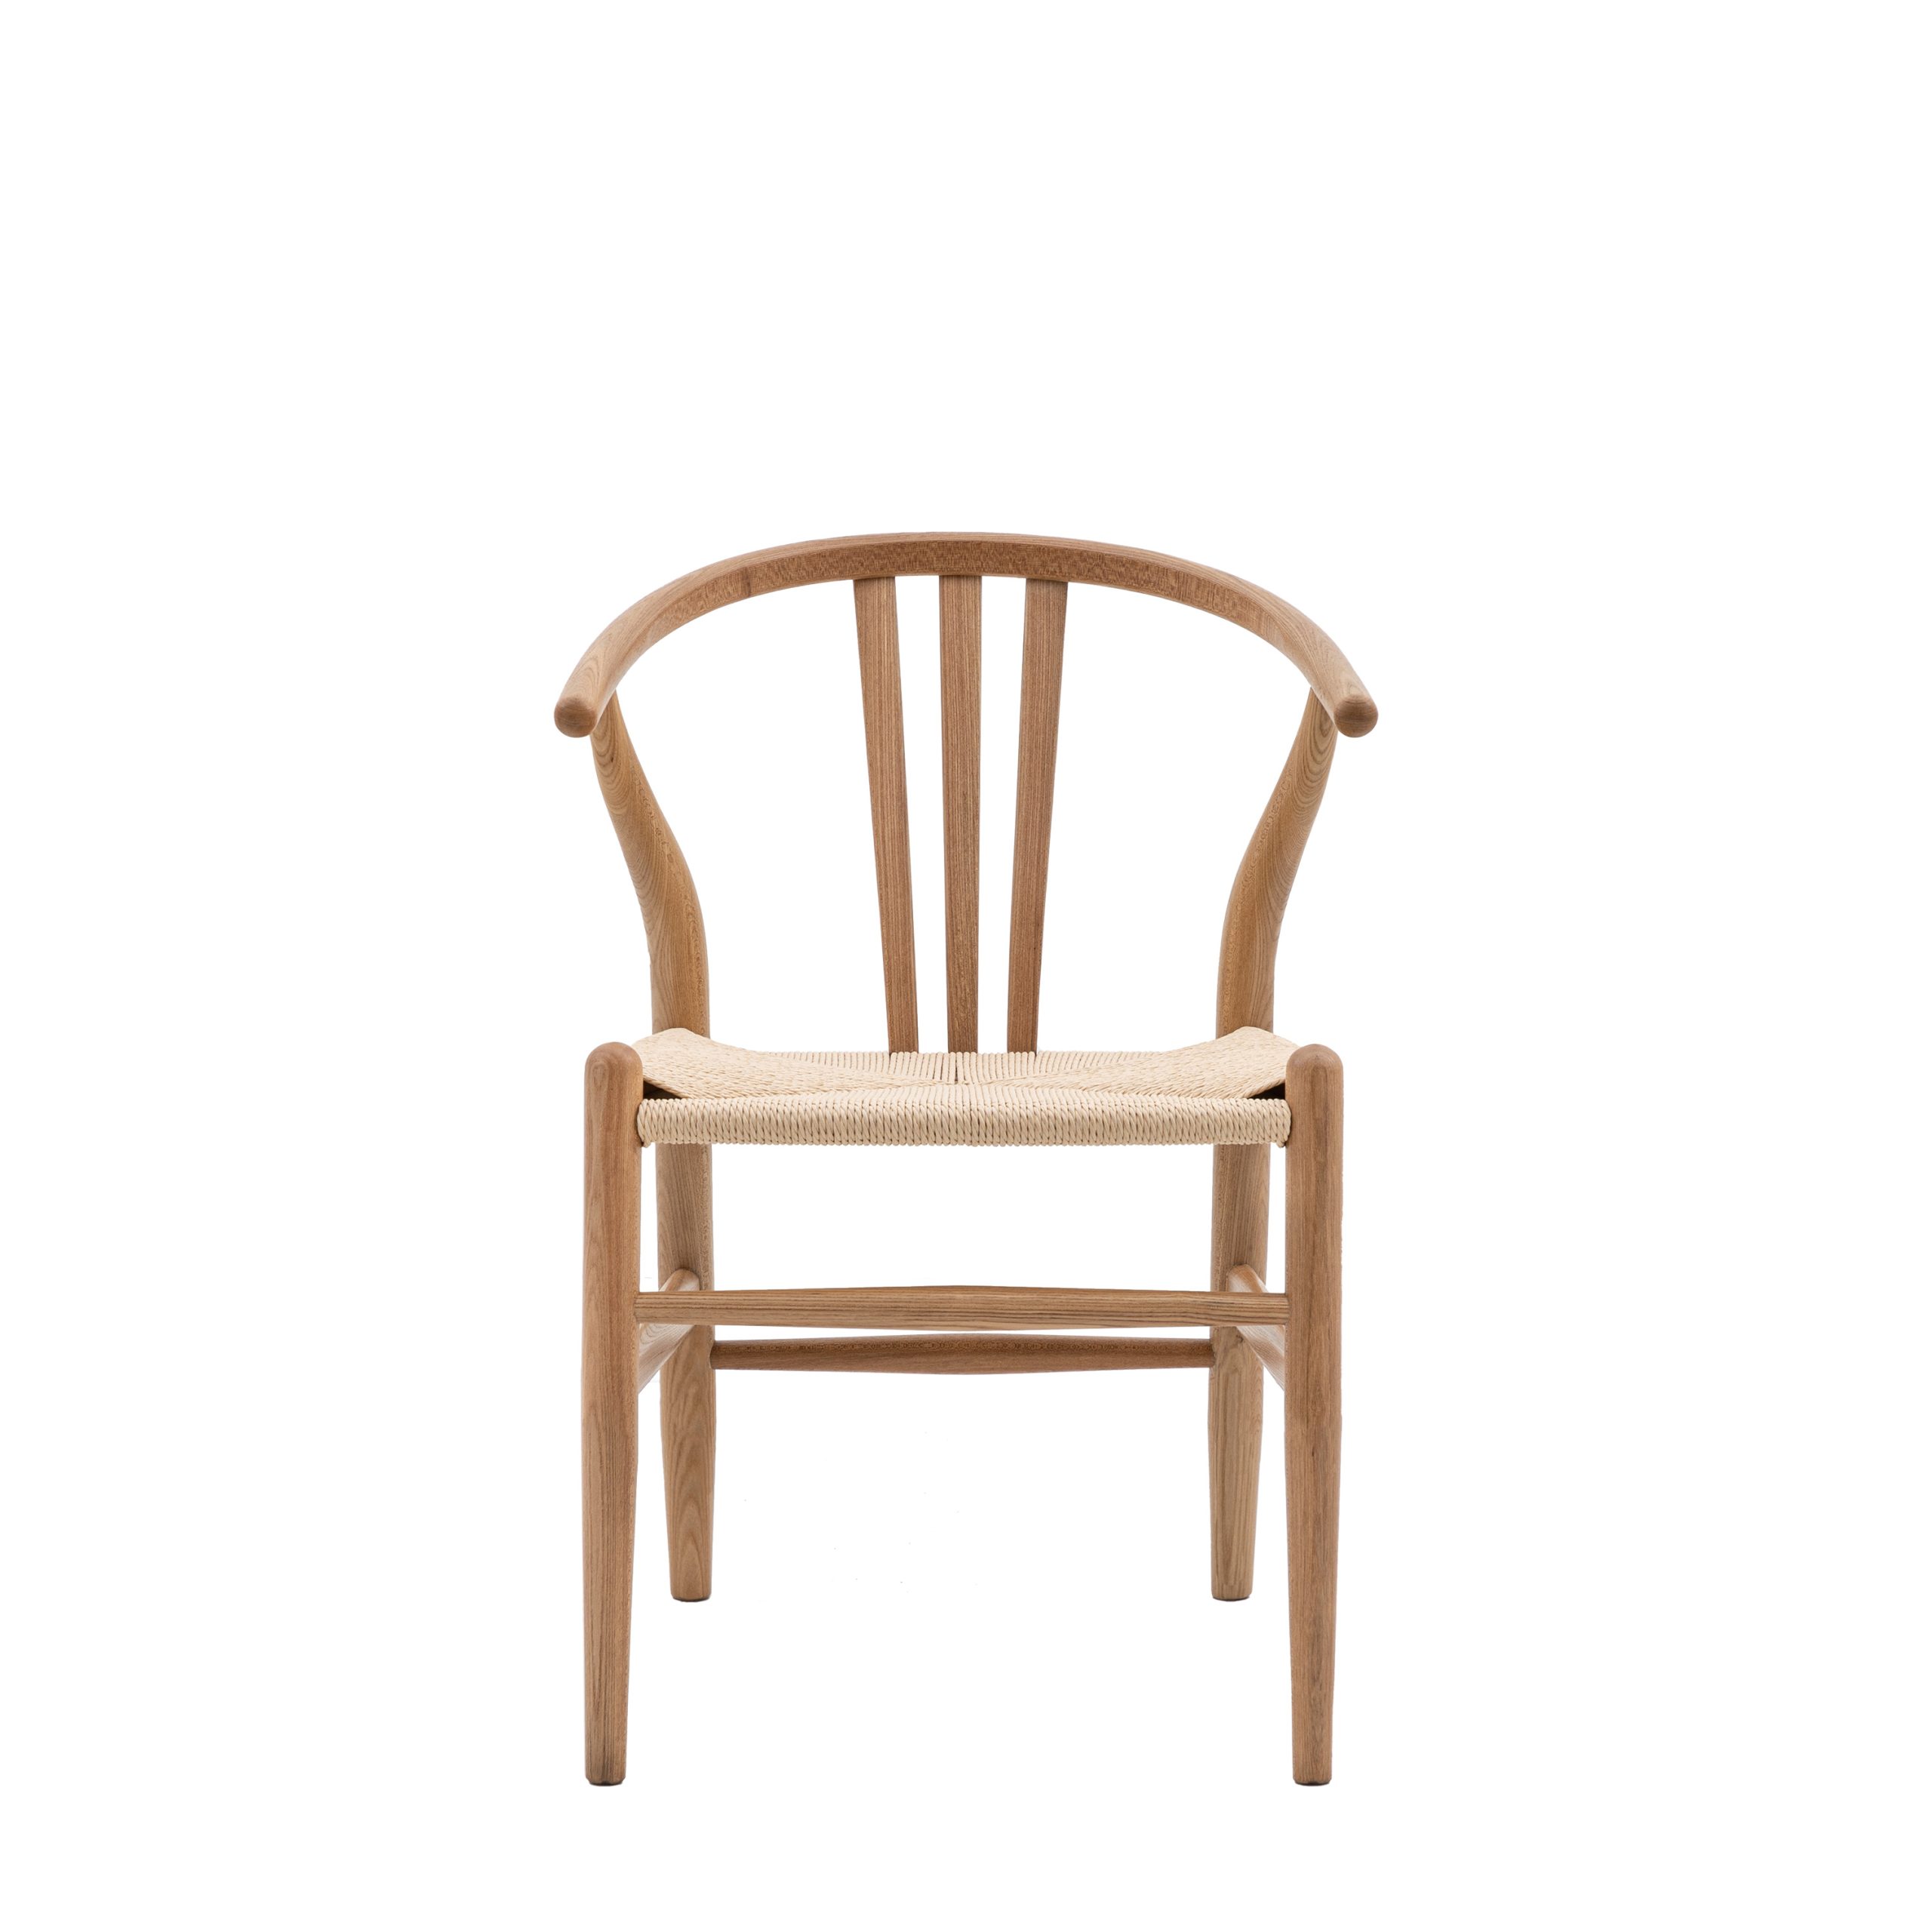 Gallery Direct Whitney Chair Natural (Set of 2)